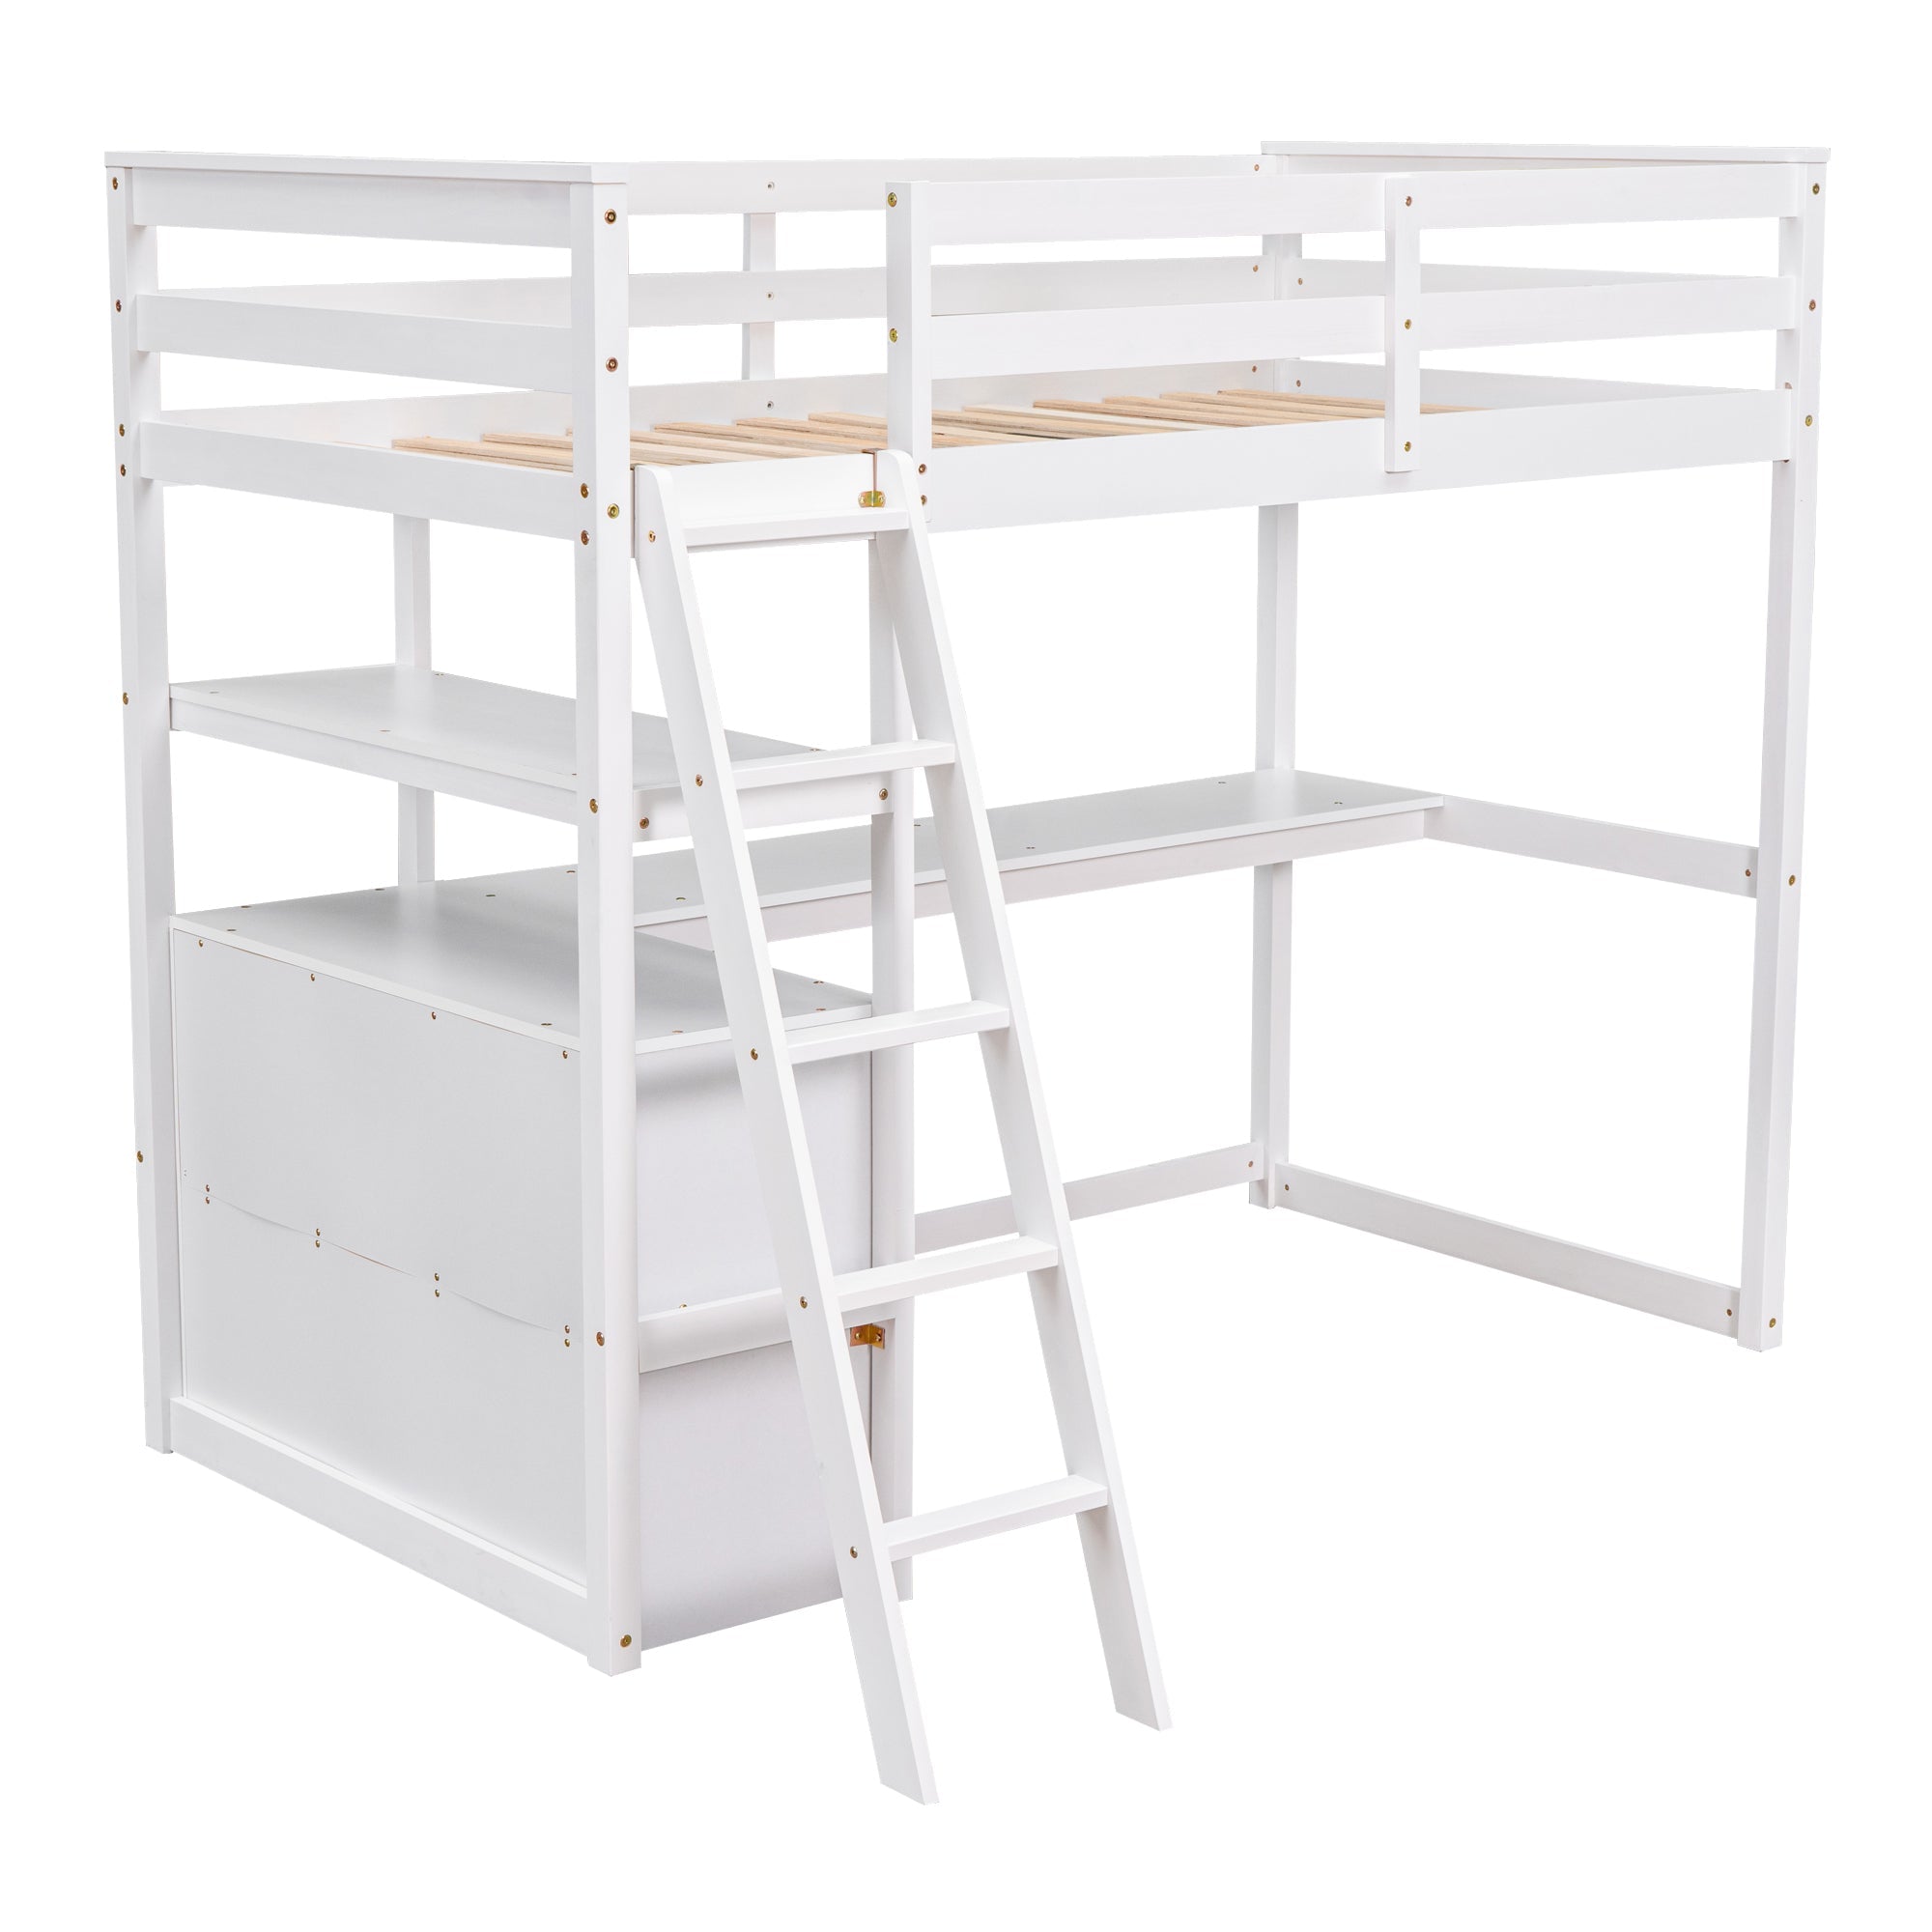 Euroco Twin Loft Bed with Desk for Child, White